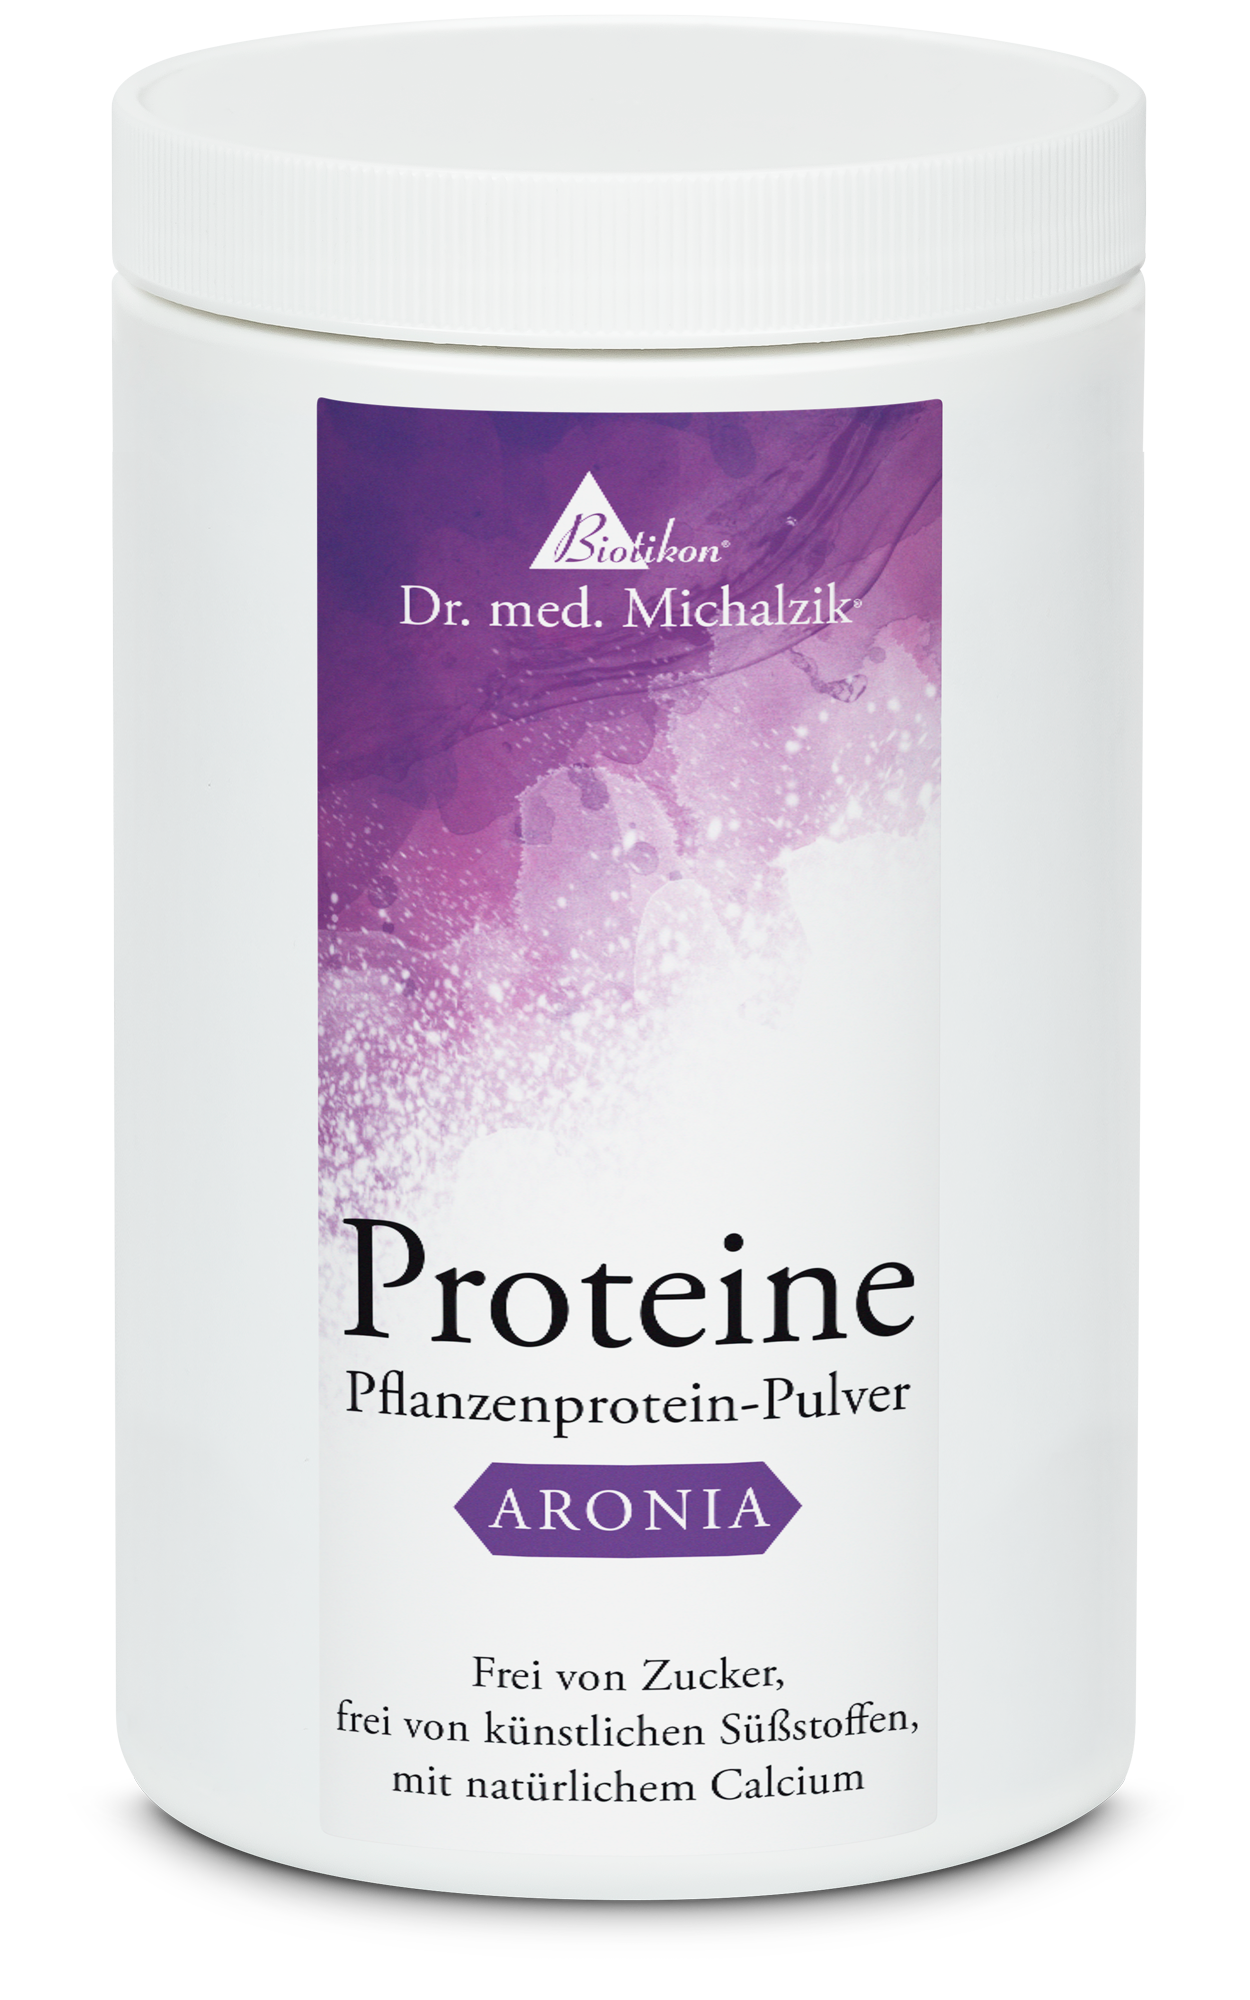 Proteine - Aronia gustose di Dr. med. Michalzik